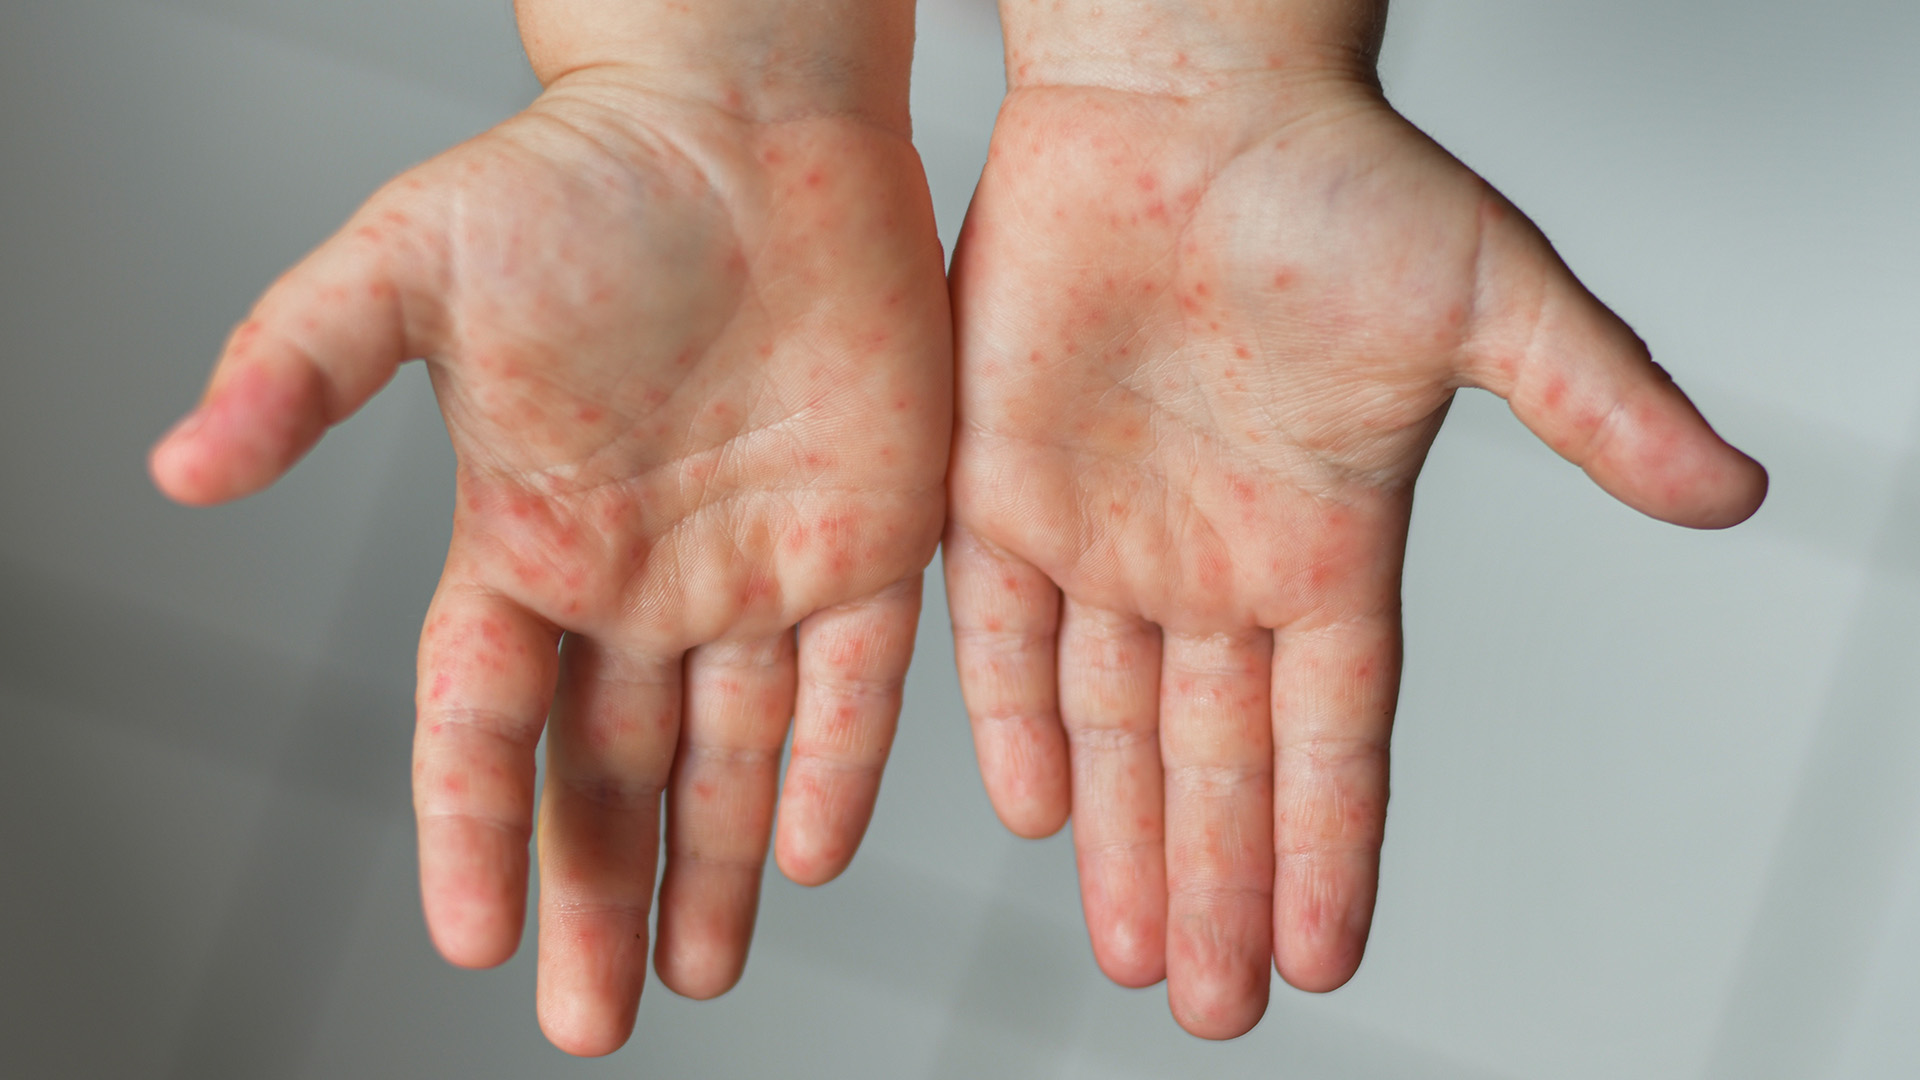 Hand, Foot and Mouth Disease: What Parents Need To Know 